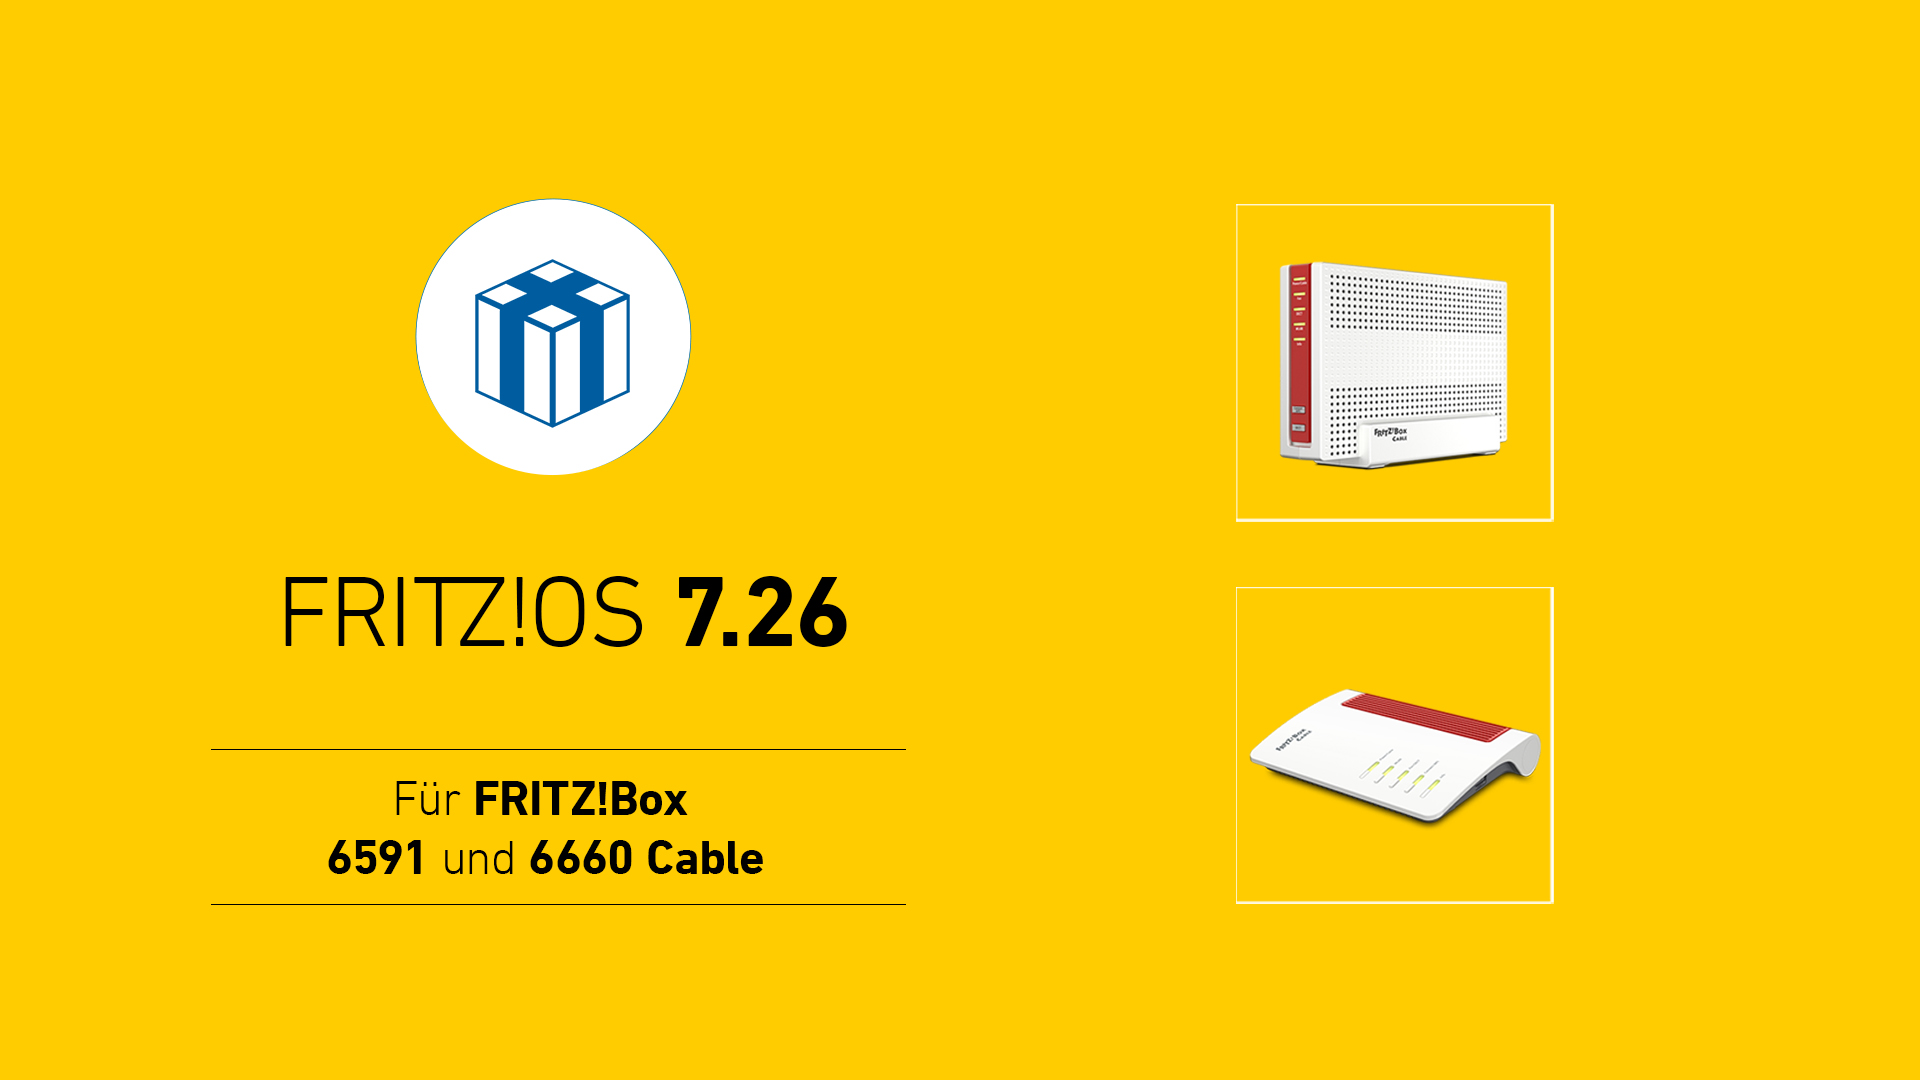 FritzOS 7.26 Update: Two FritzBoxes get the new version